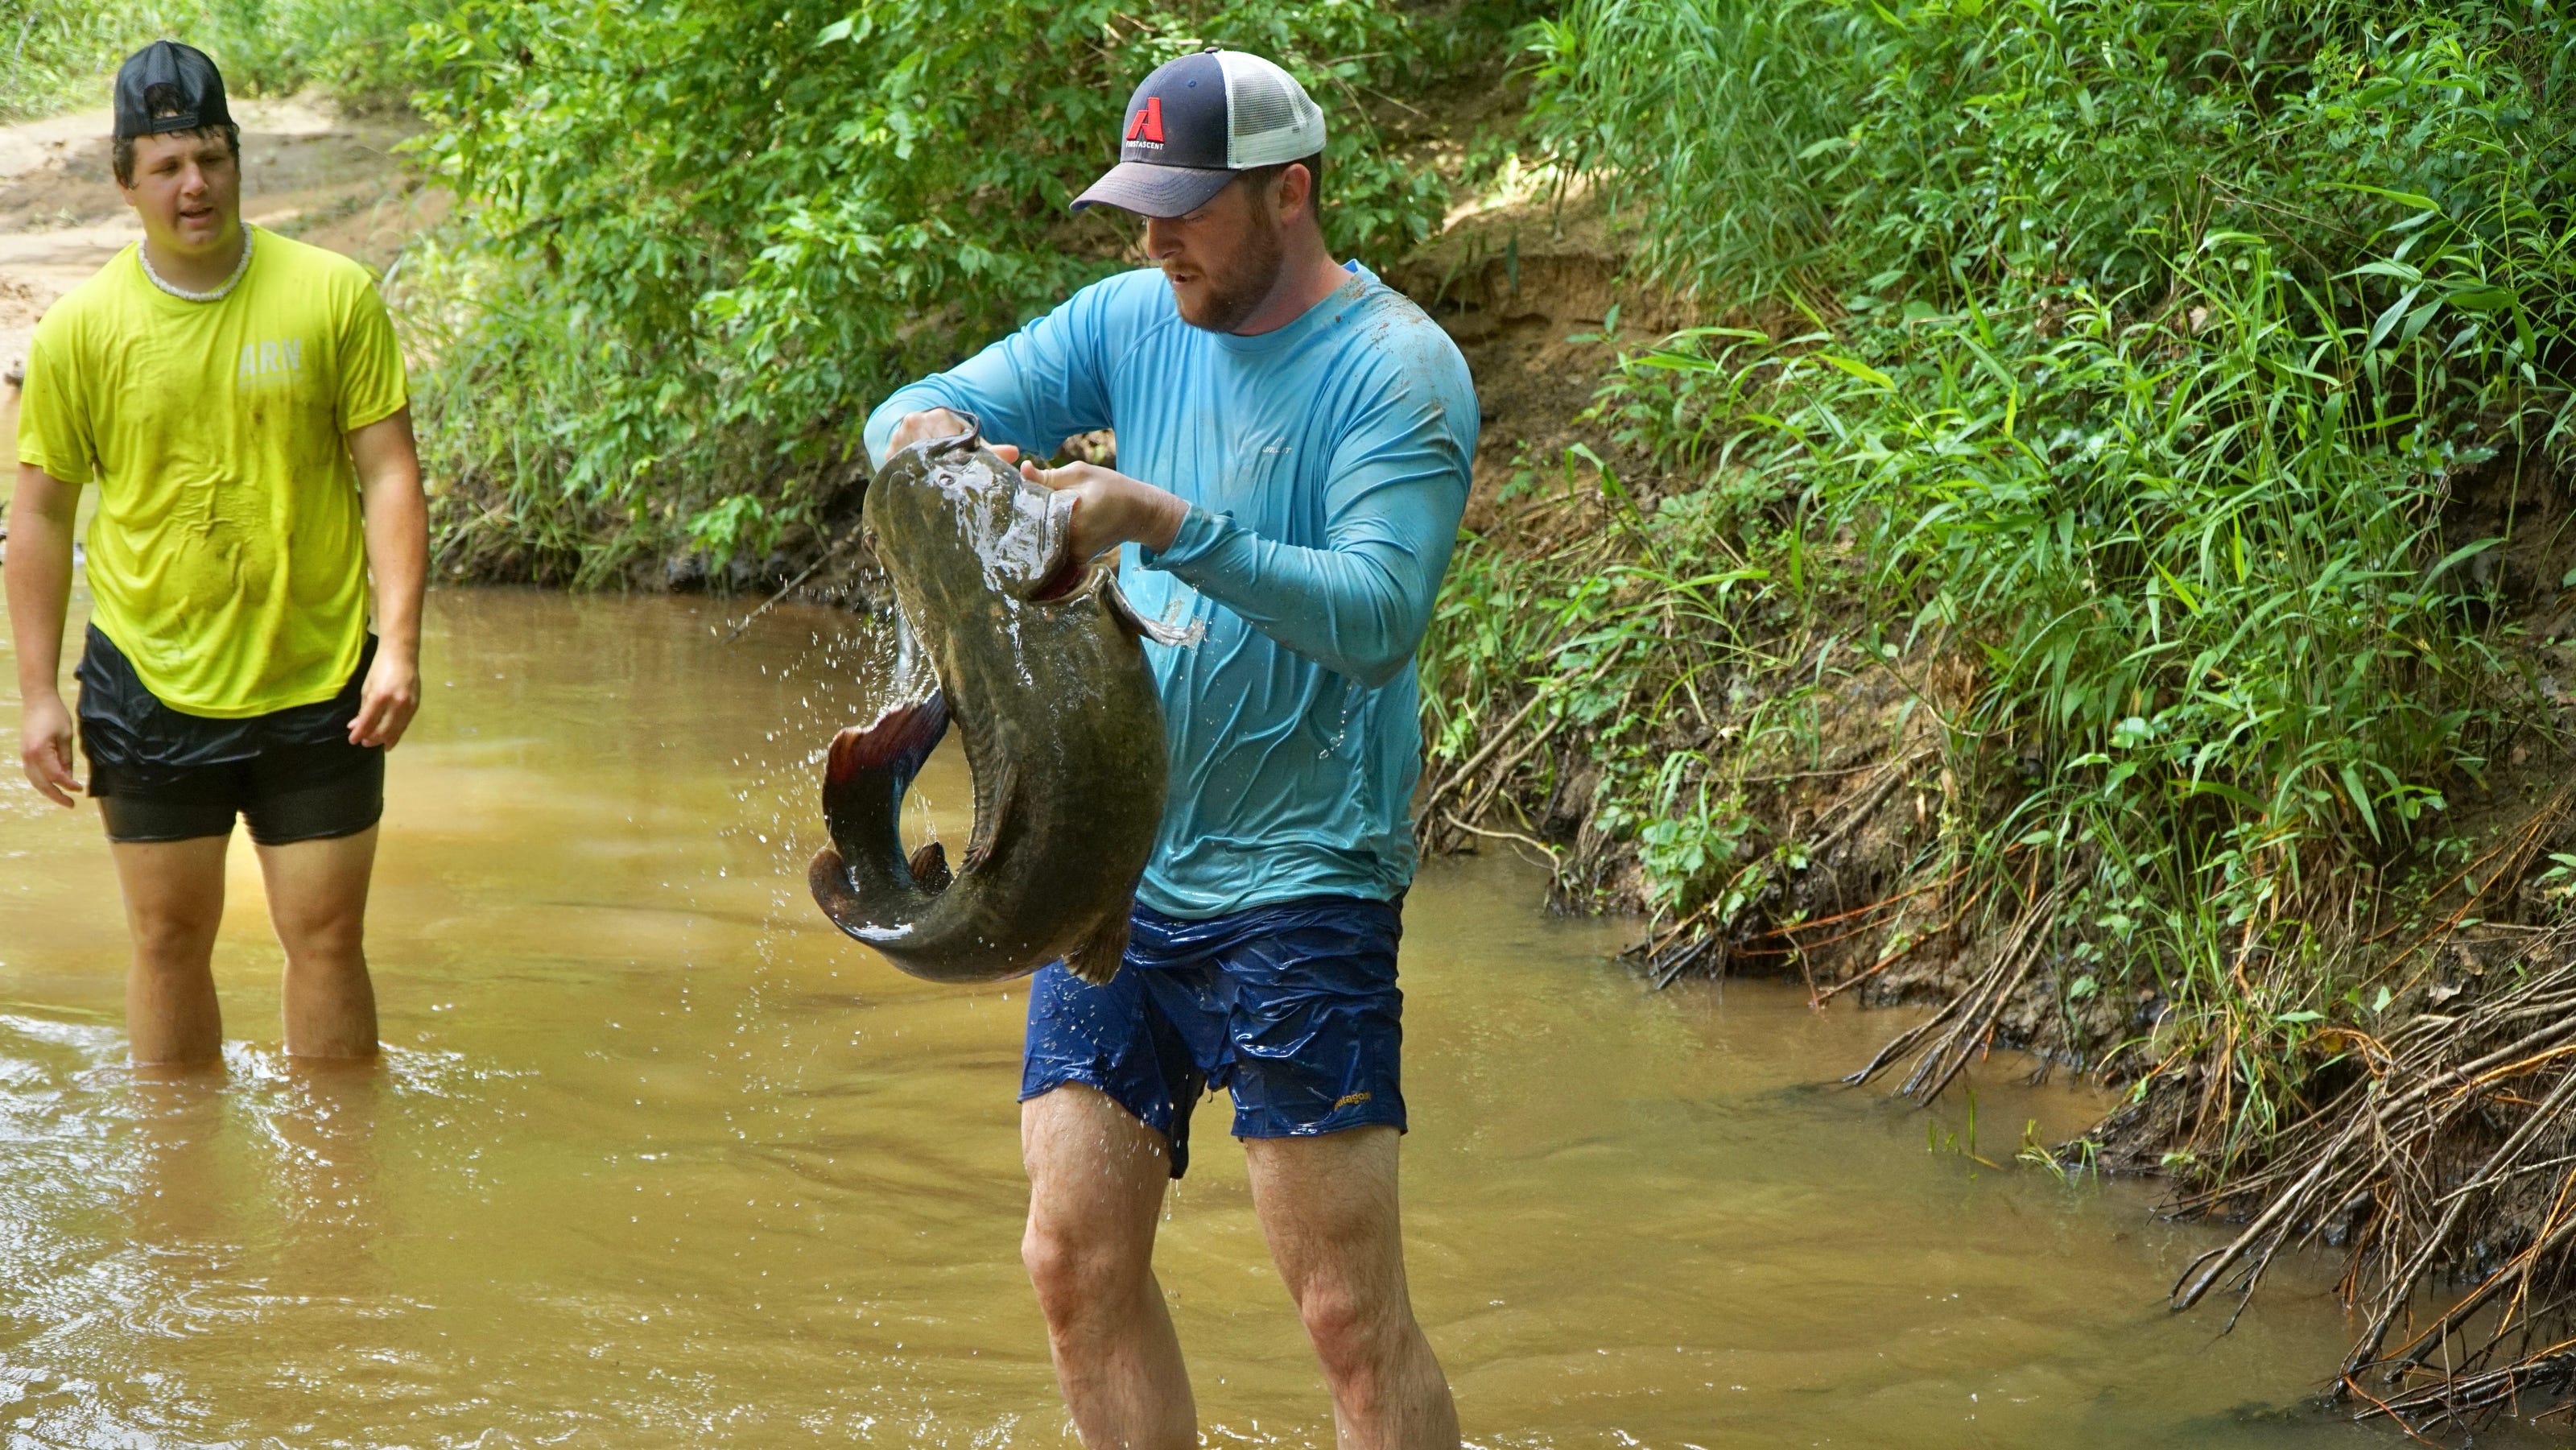 Earn your Okie stripes by noodling an experience